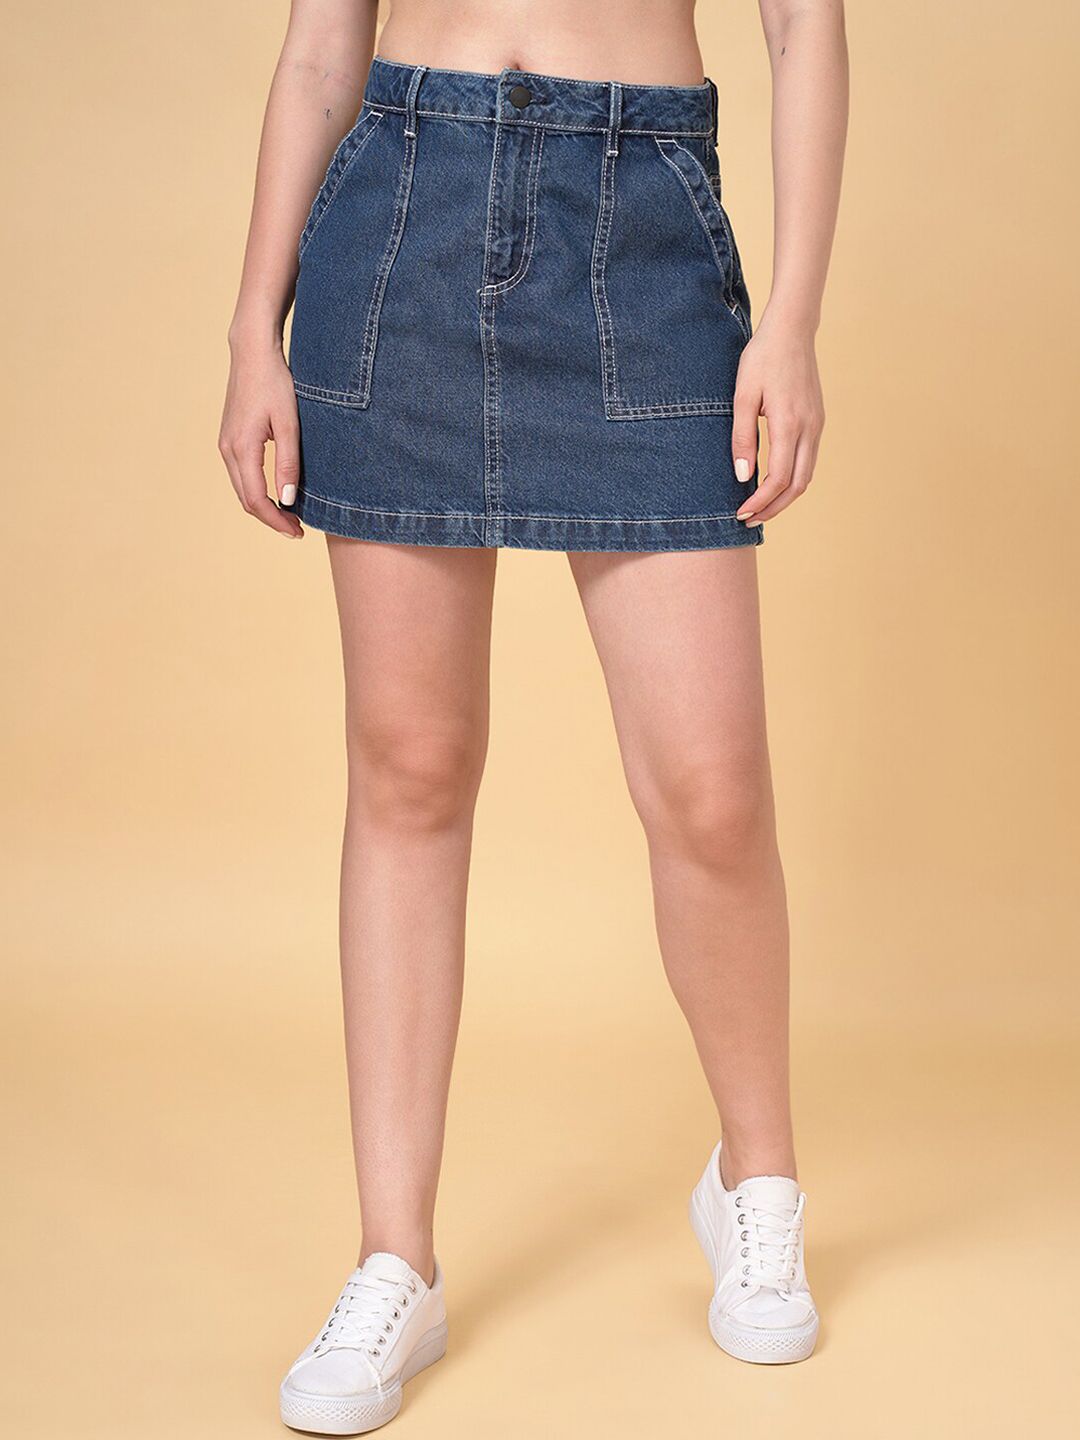 SF JEANS by Pantaloons Mini Cotton Denim Straight A-Line Skirt Price in India